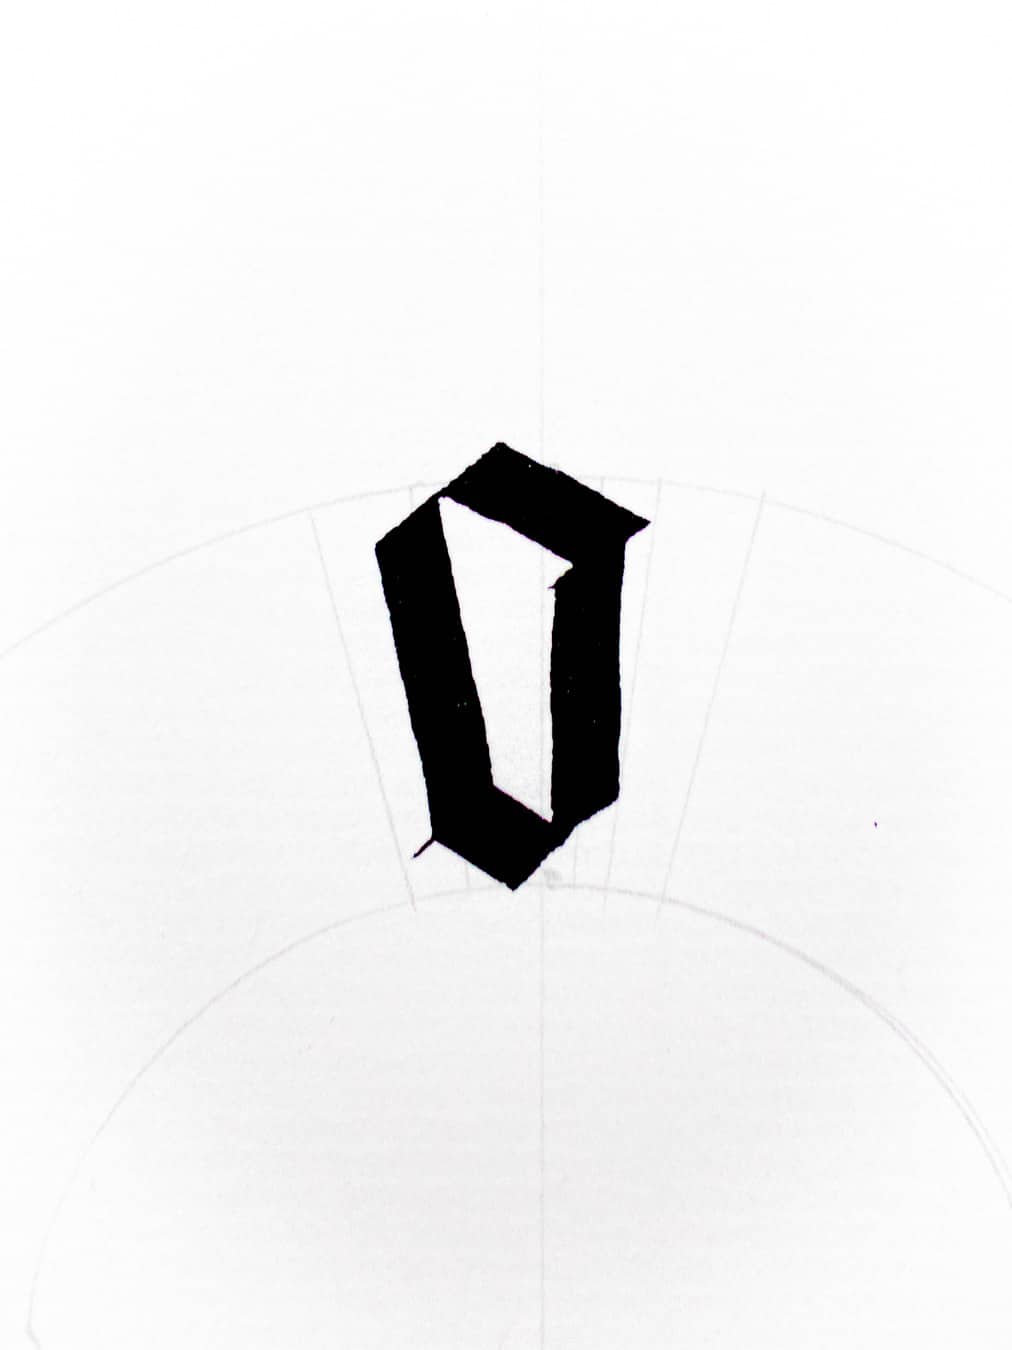 tweaked letter o to make fit the circular baseline